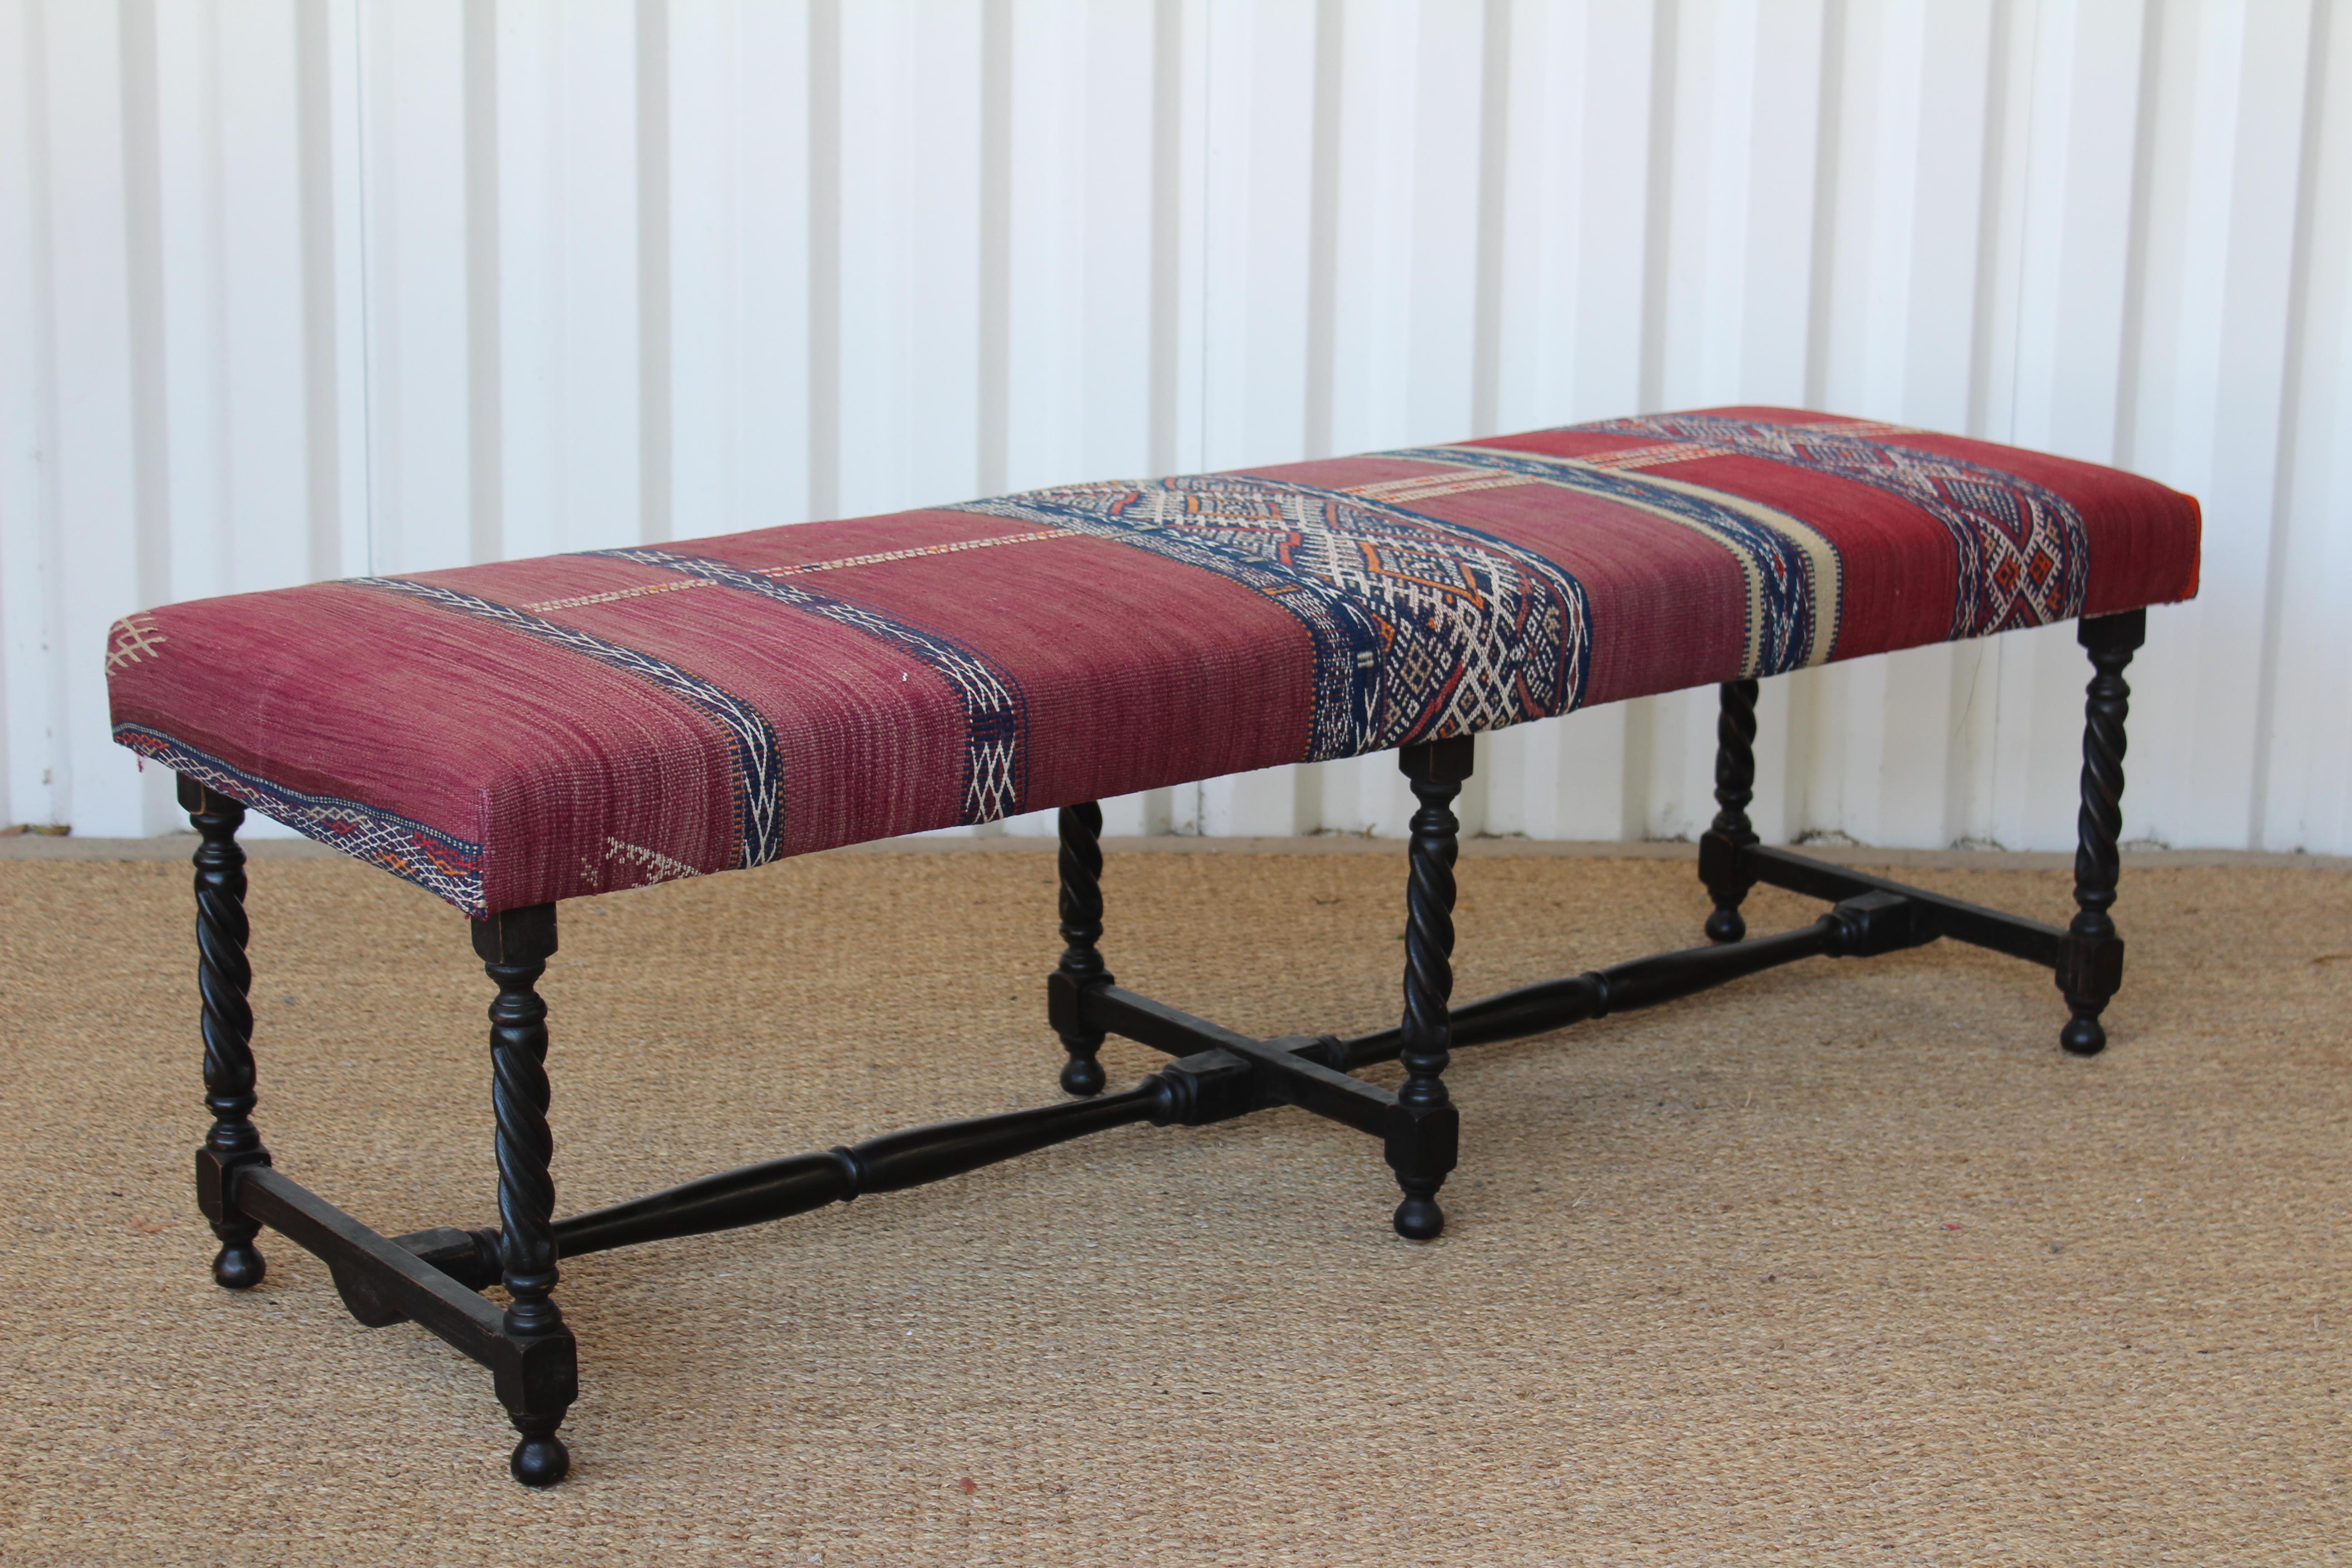 Vintage turned wood English bench, newly upholstered in a vintage Turkish kilim rug. In overall excellent condition with minor signs of age on both the wooden bench frame and vintage rug.